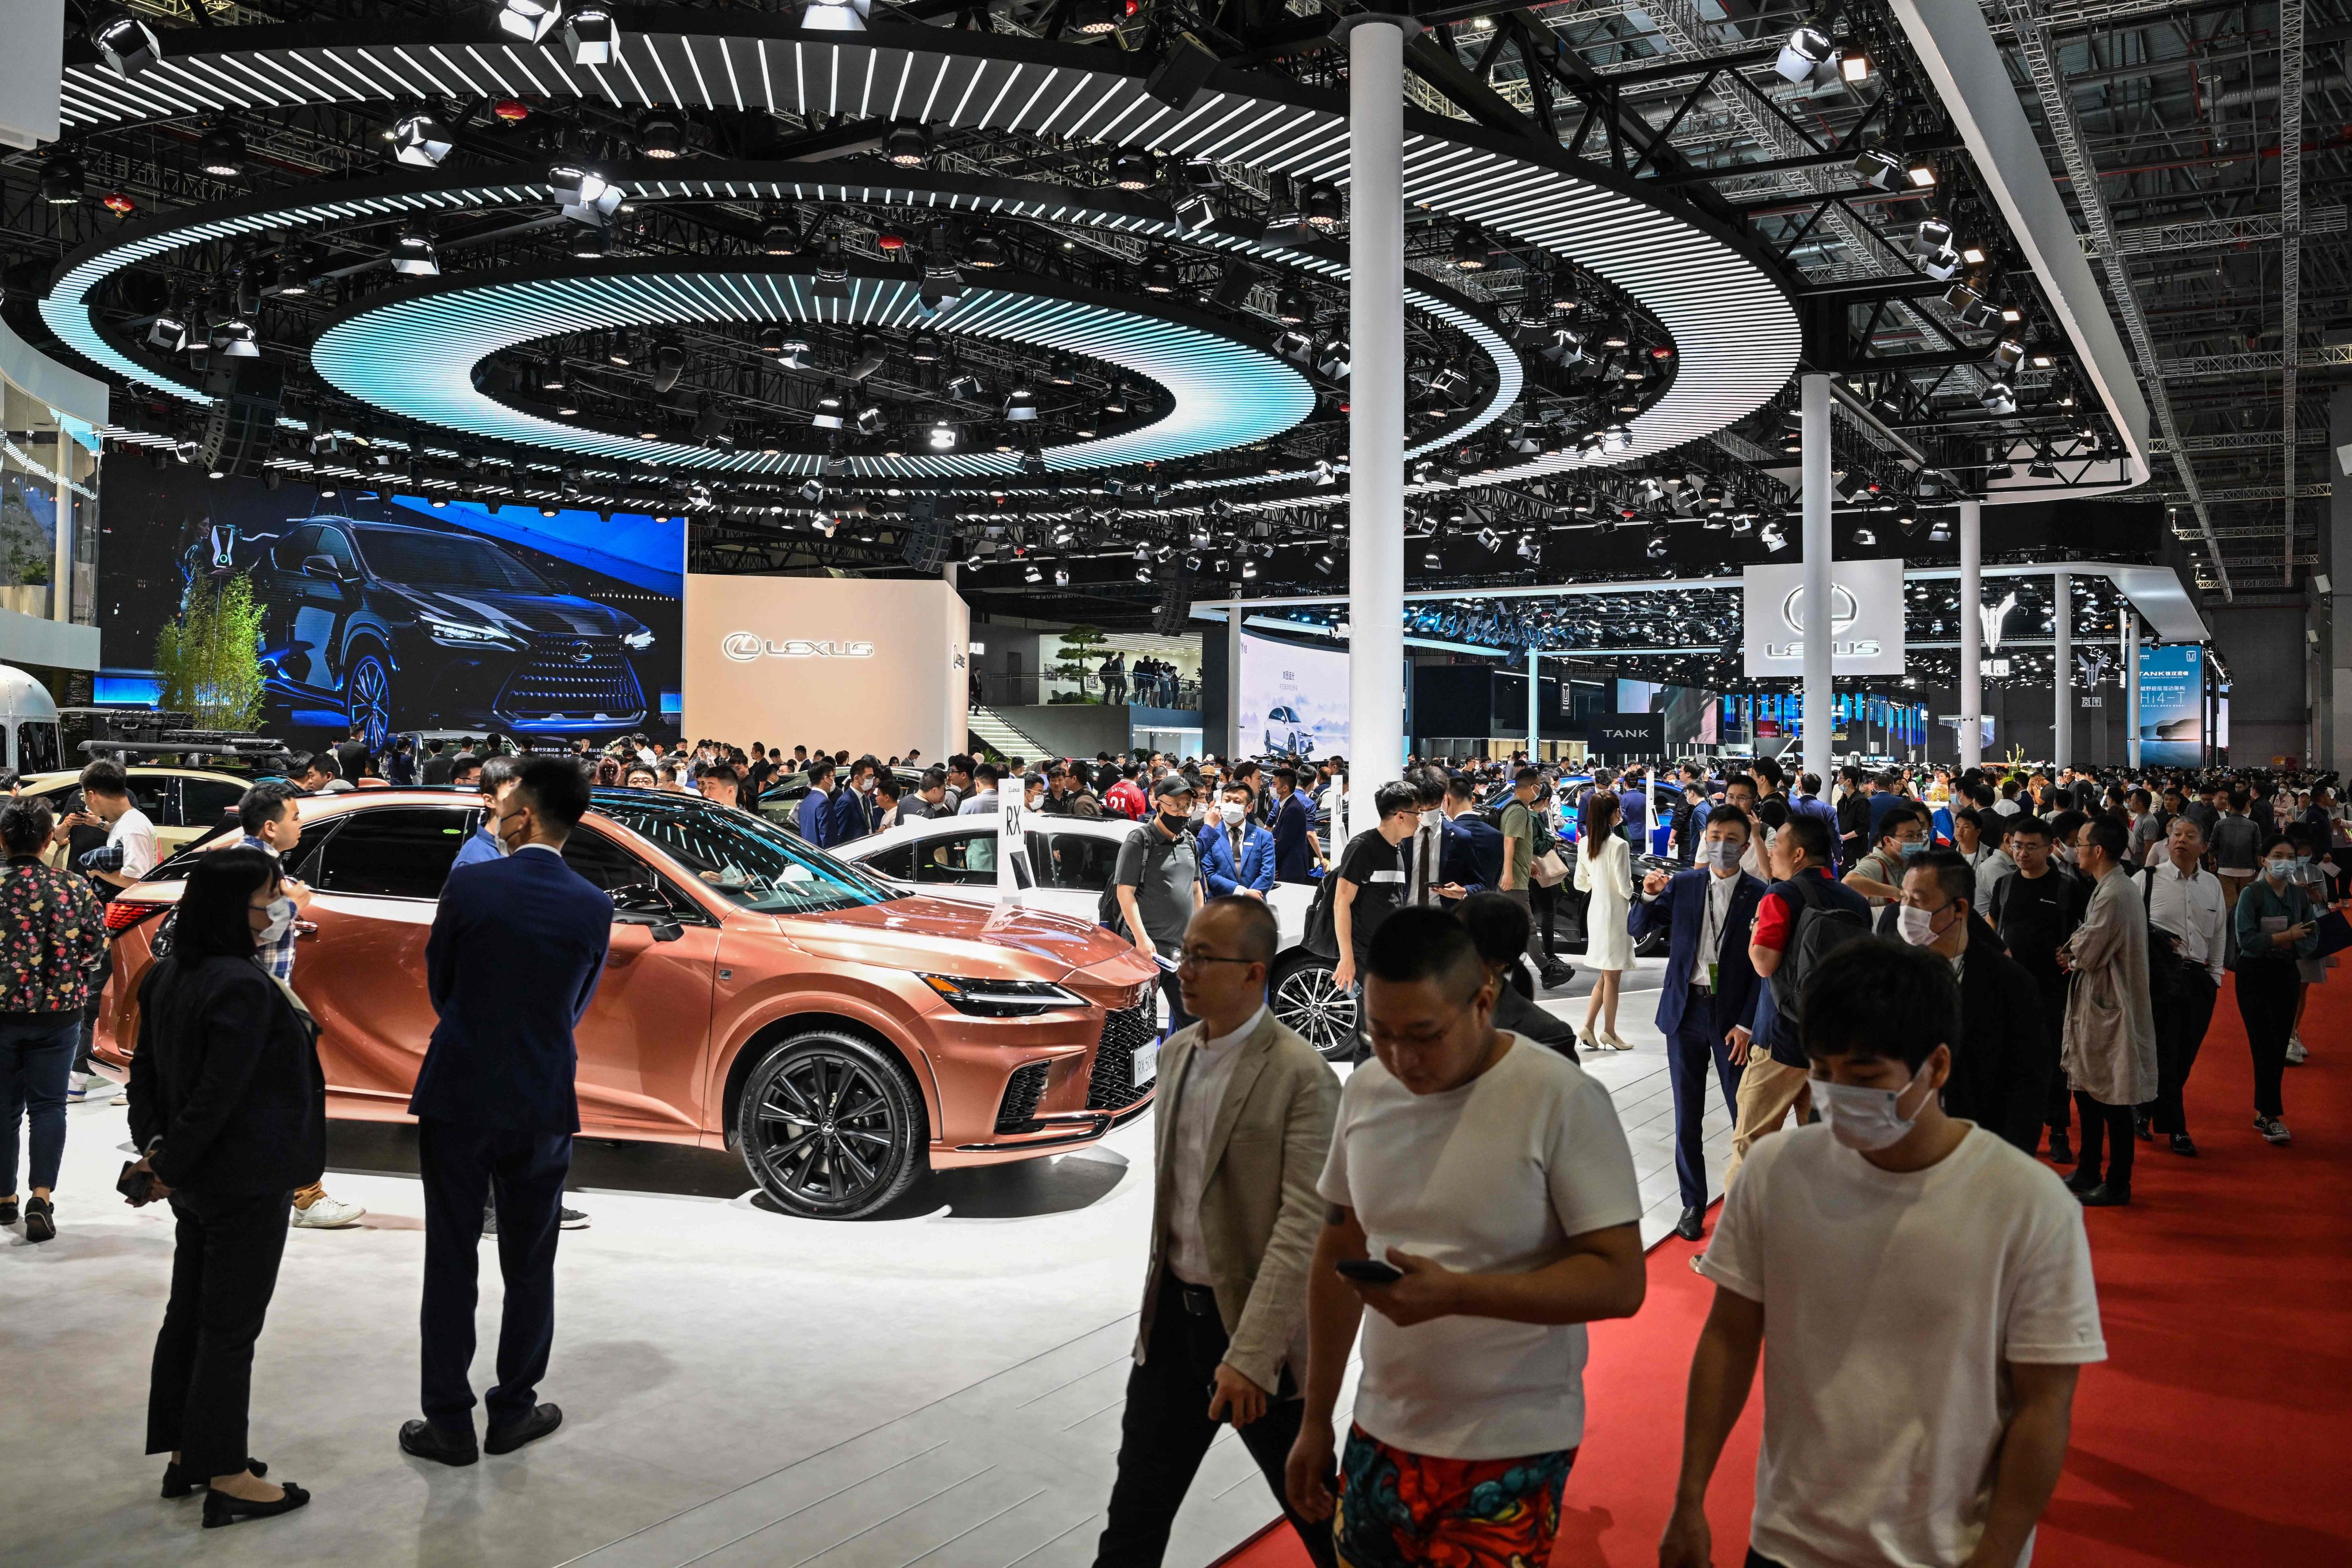 Chery Automobile  South China Morning Post